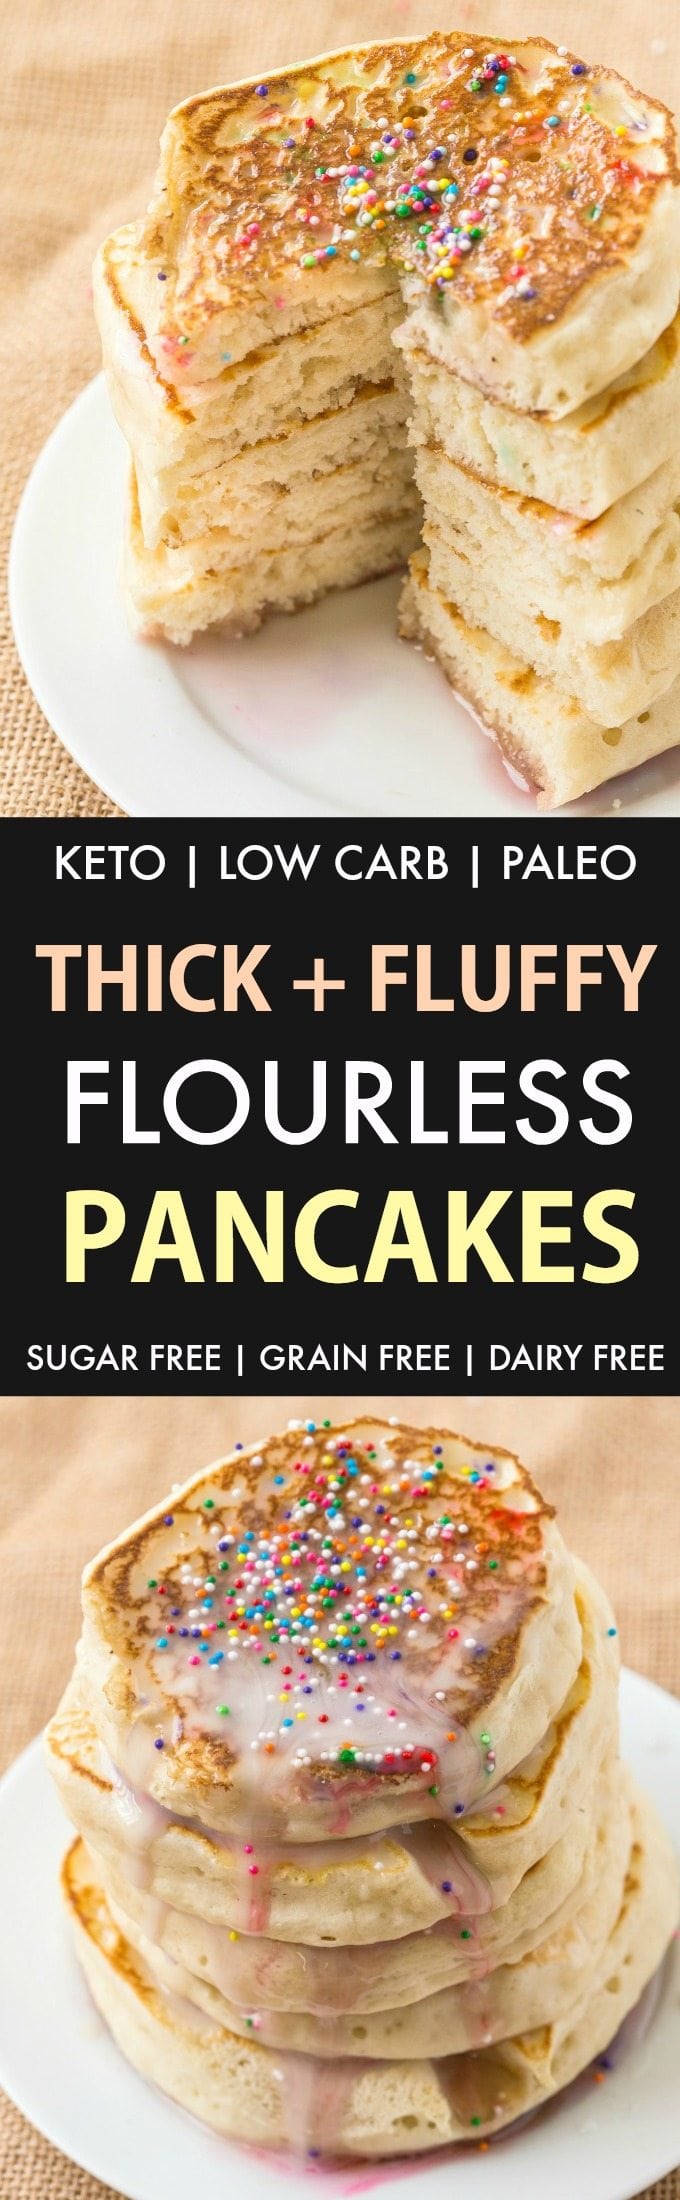 Thick Fluffy Low Carb Pancakes (Keto, Paleo, Sugar Free)- Ultra thick and fluffy pancakes suitable for a low carb and ketogenic diet, but you'd never tell! #keto #ketobreakfast #paleopancakes #lowcarbrecipe #lowcarbpancakes | Recipe on thebigmansworld.com